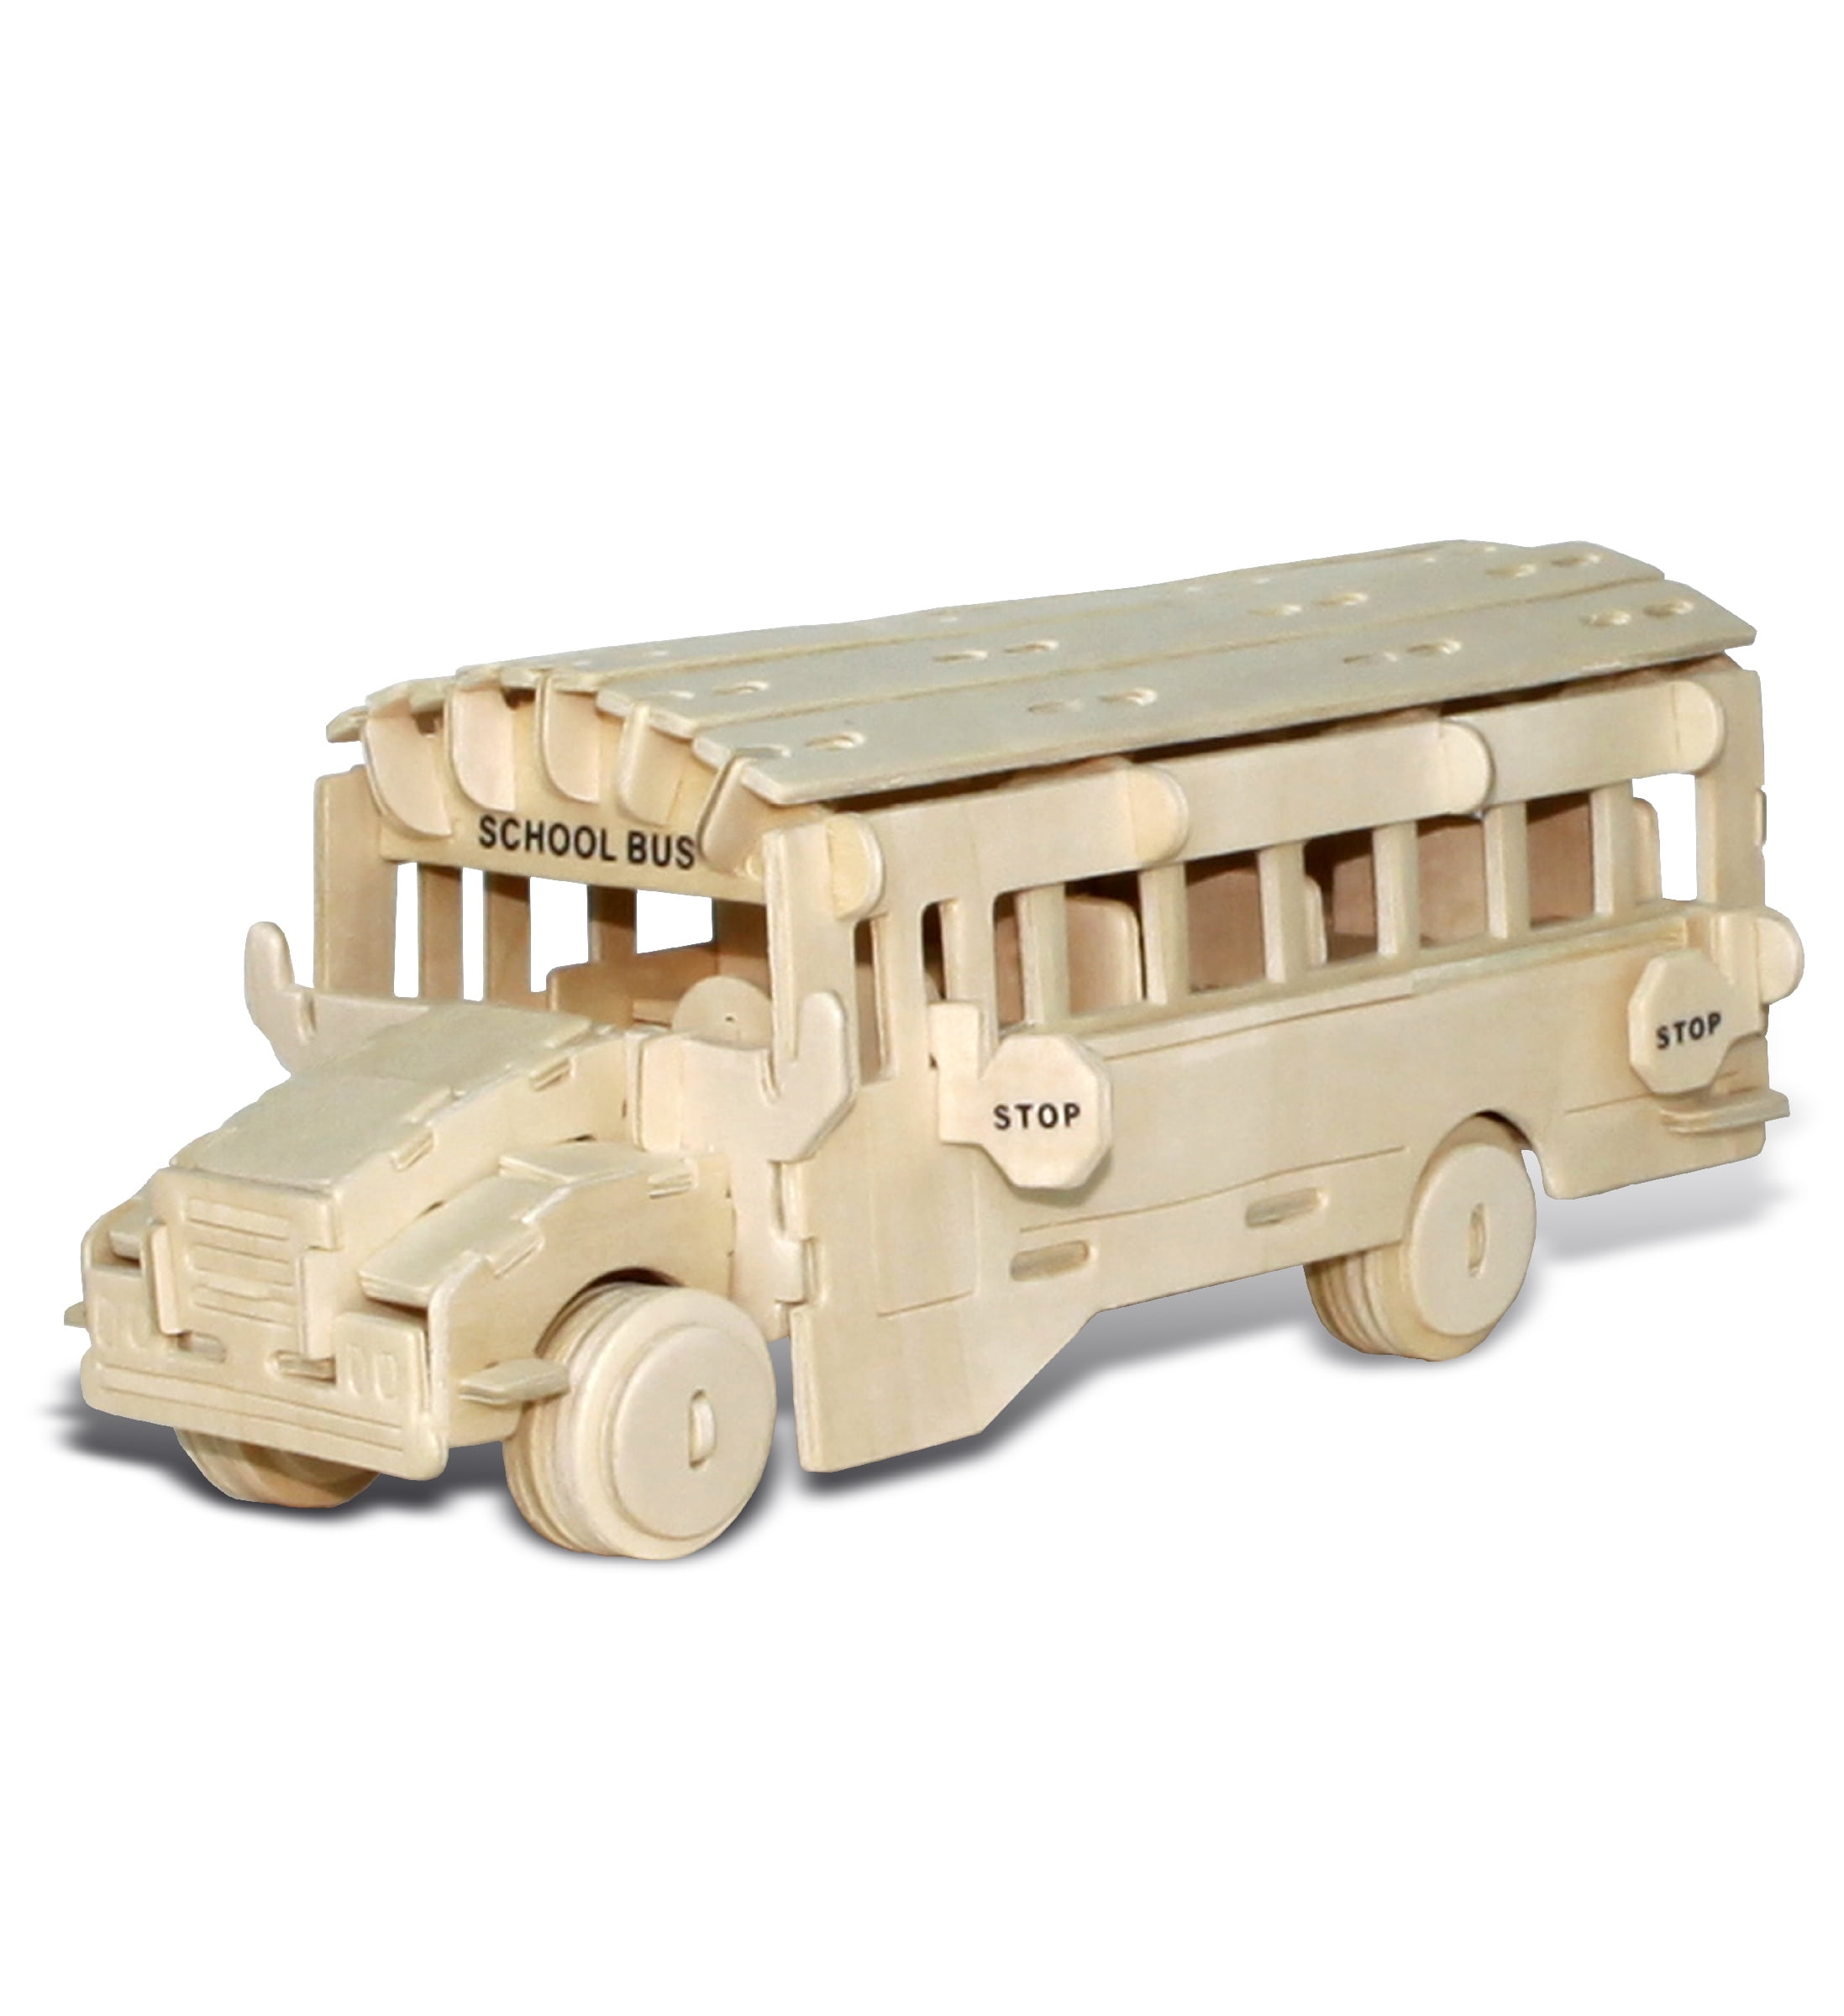 Eliiti Wooden School Bus 3D Puzzle Vehicle Toy for Boys Kids 3 to 6 Years Old 